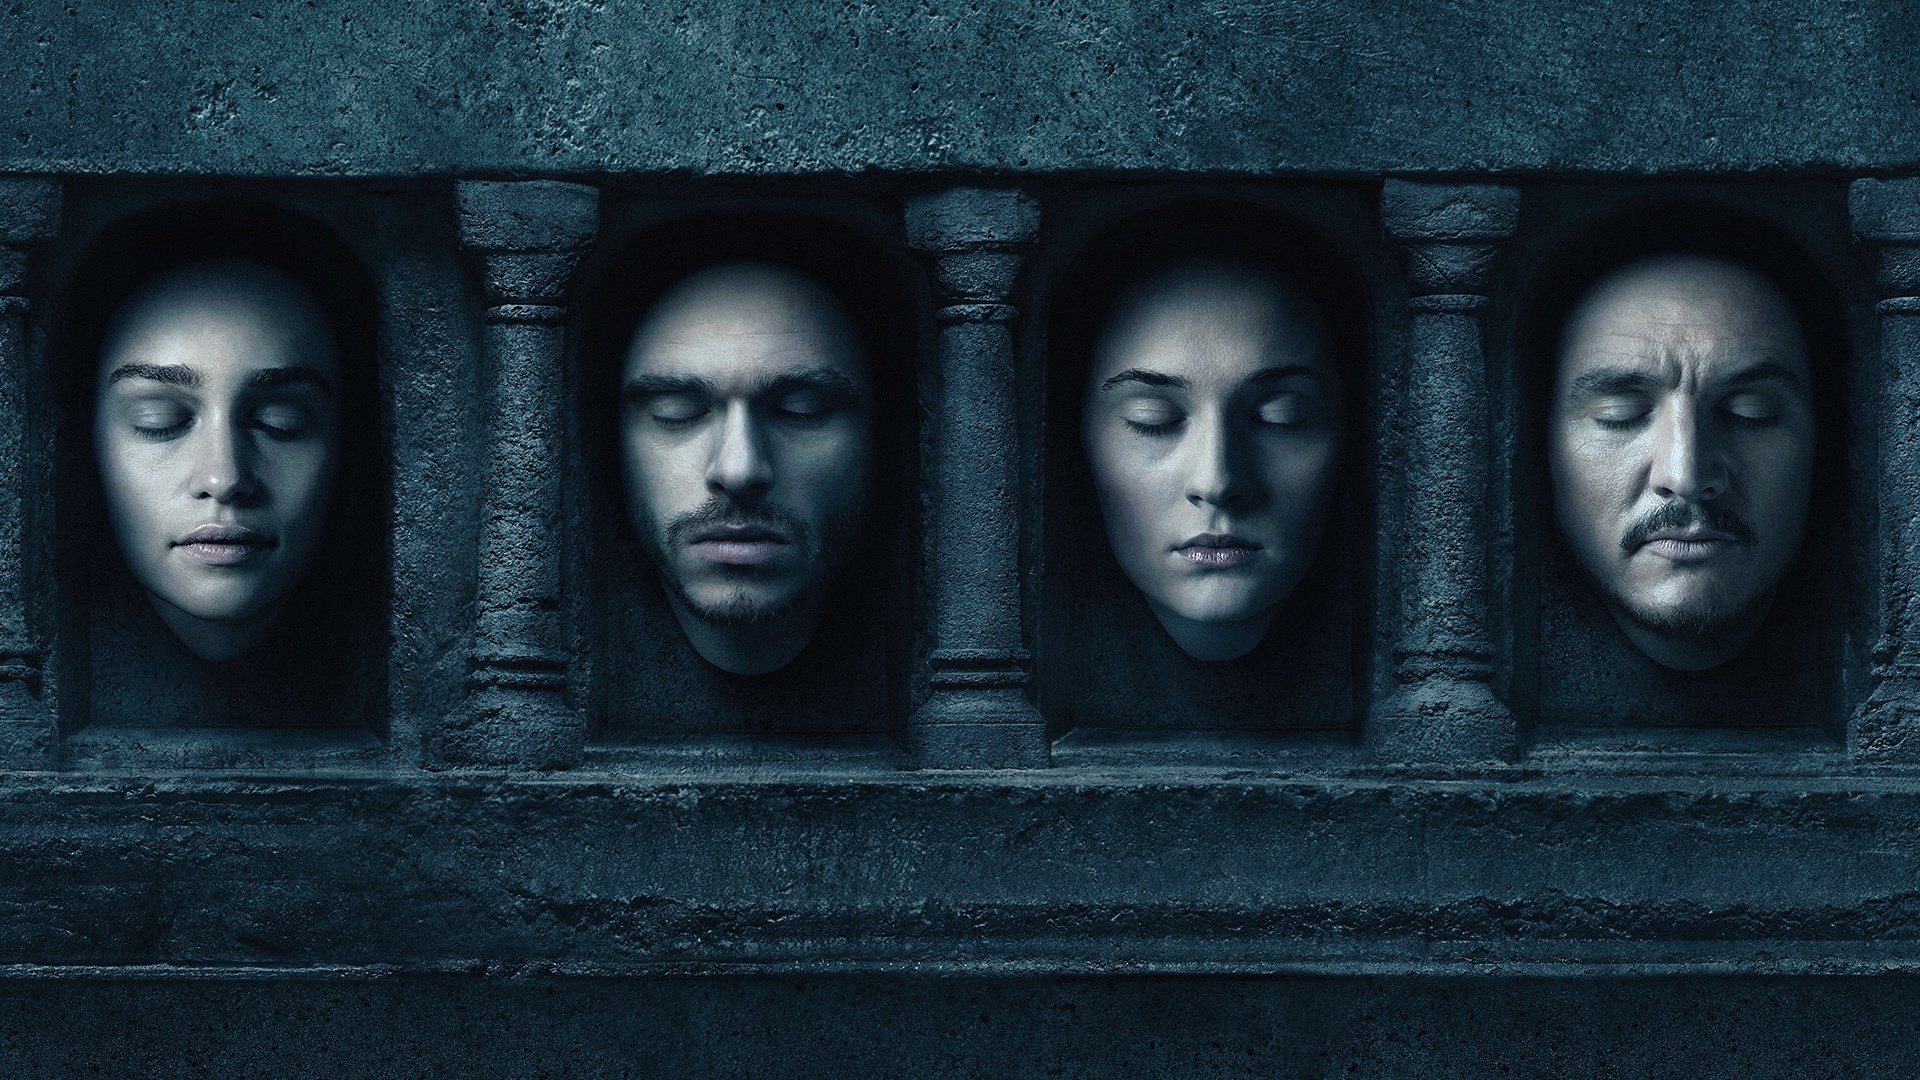 Game of thrones wallpaper pack 1080p hd Corwin Holiday 1920×1080